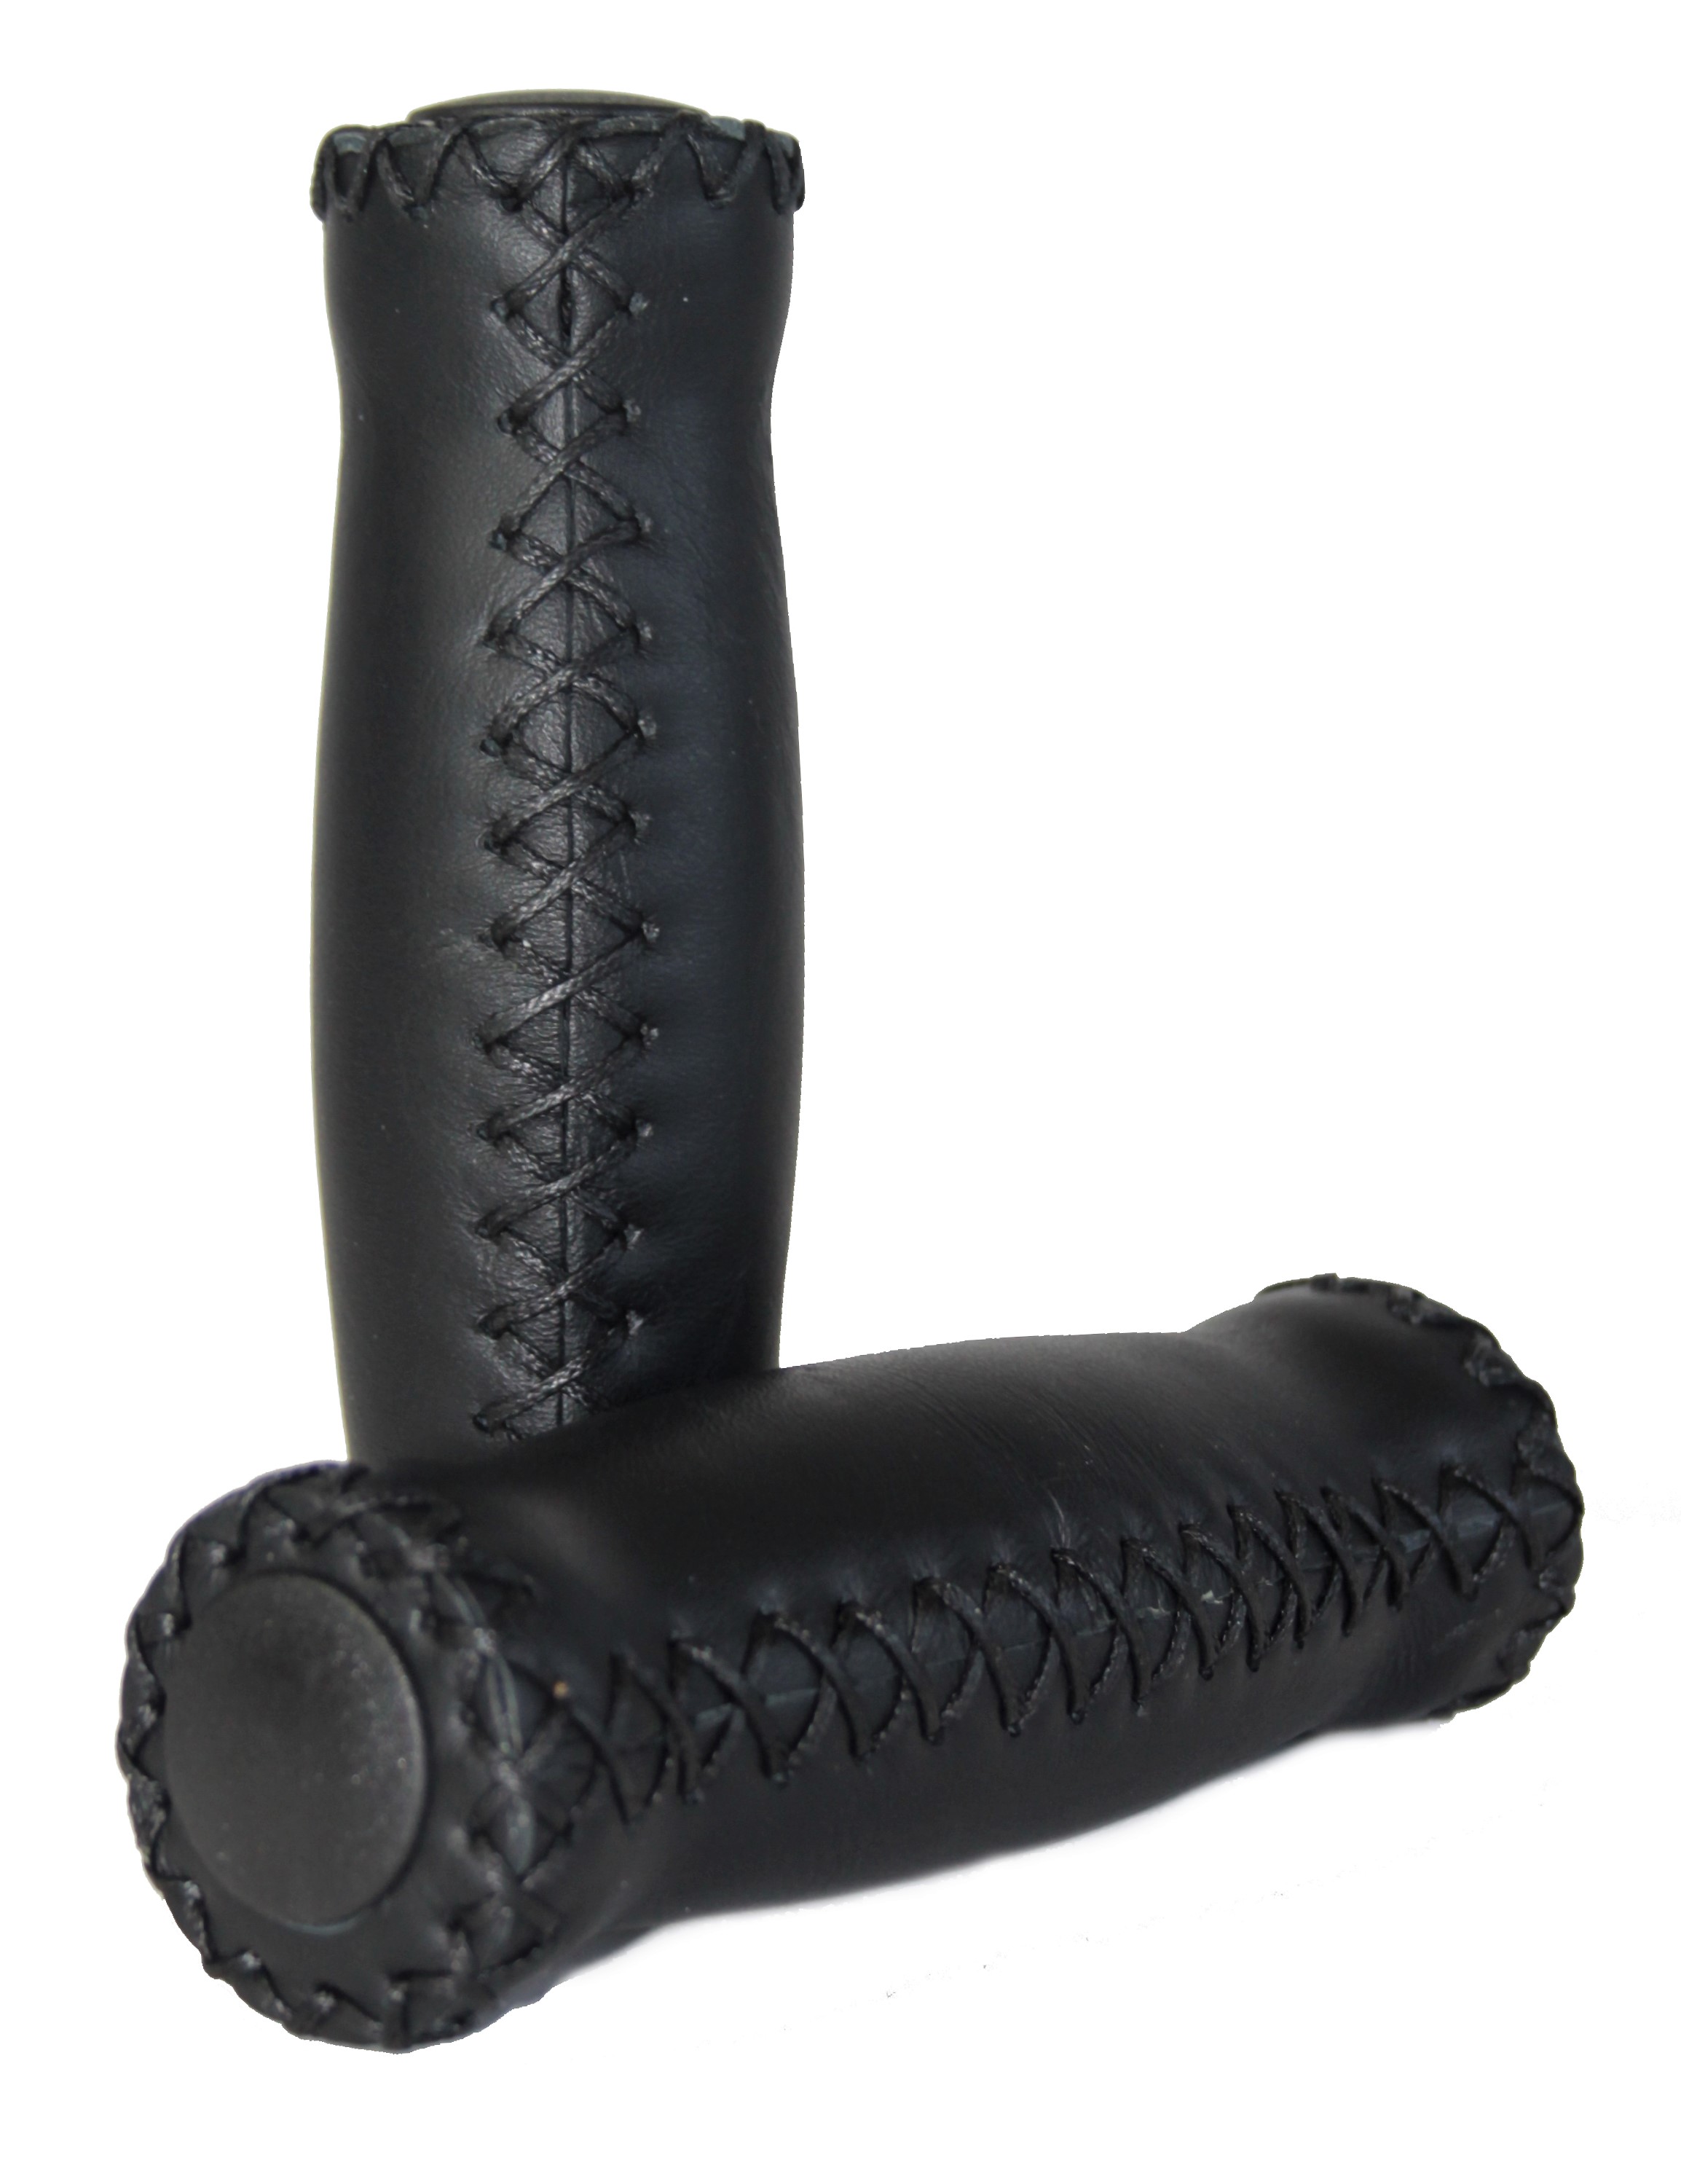 Leather Grips with Crossed Seams, ergonomical, black